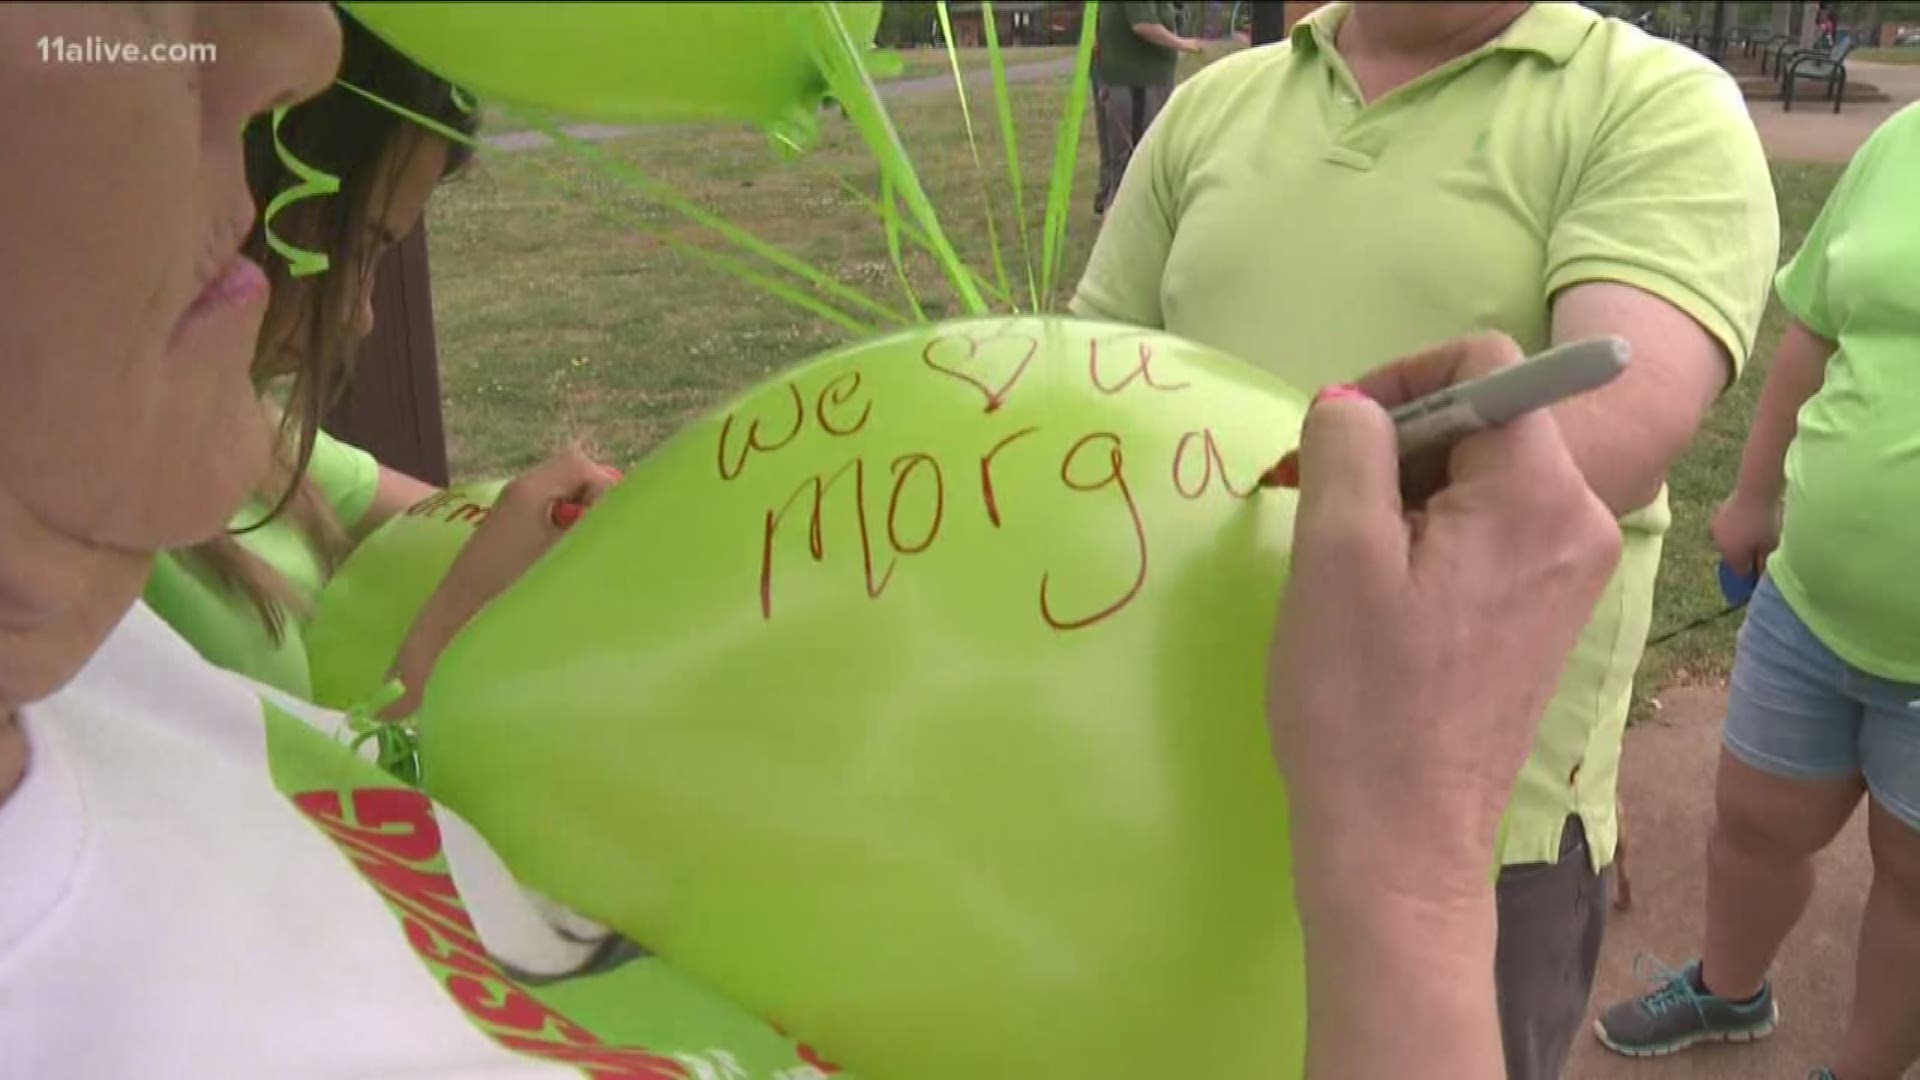 Morgan Bauer disappeared after moving to Atlanta. Her family held a balloon release to mark her 23rd birthday.